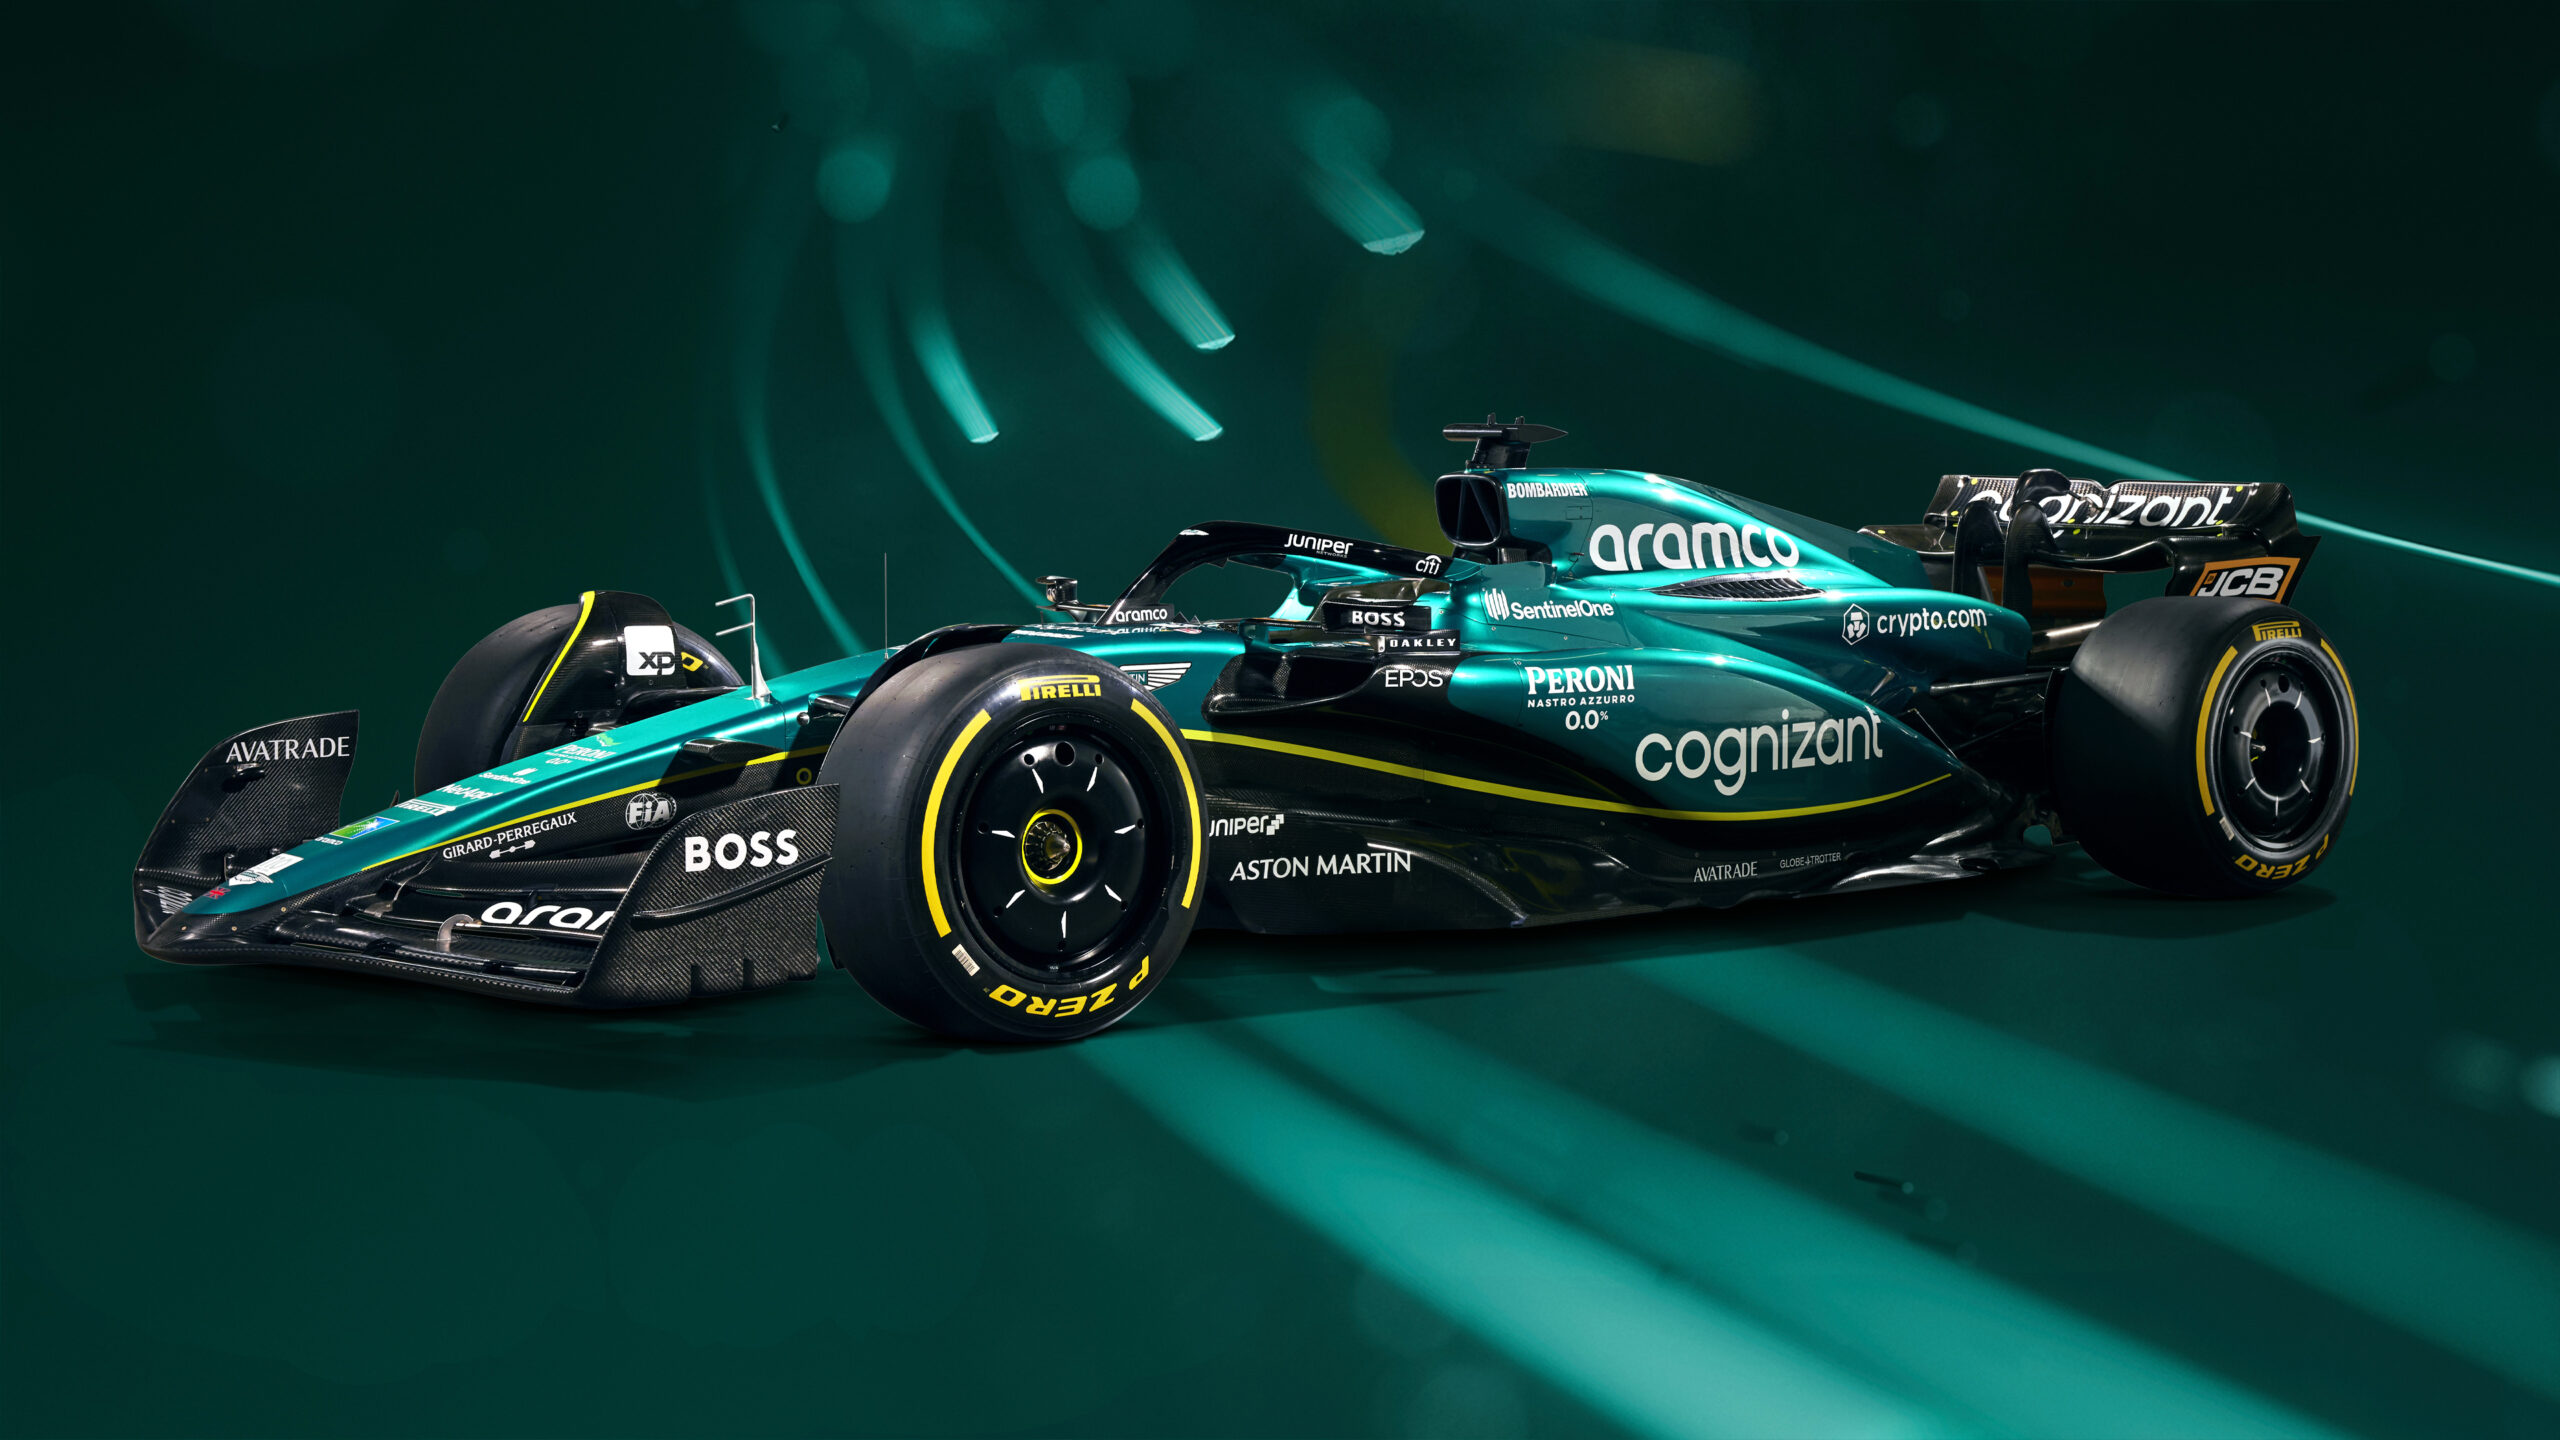 Aston Martin celebrates 110th anniversary with reveal of special logo on AMR23 Formula 1® car